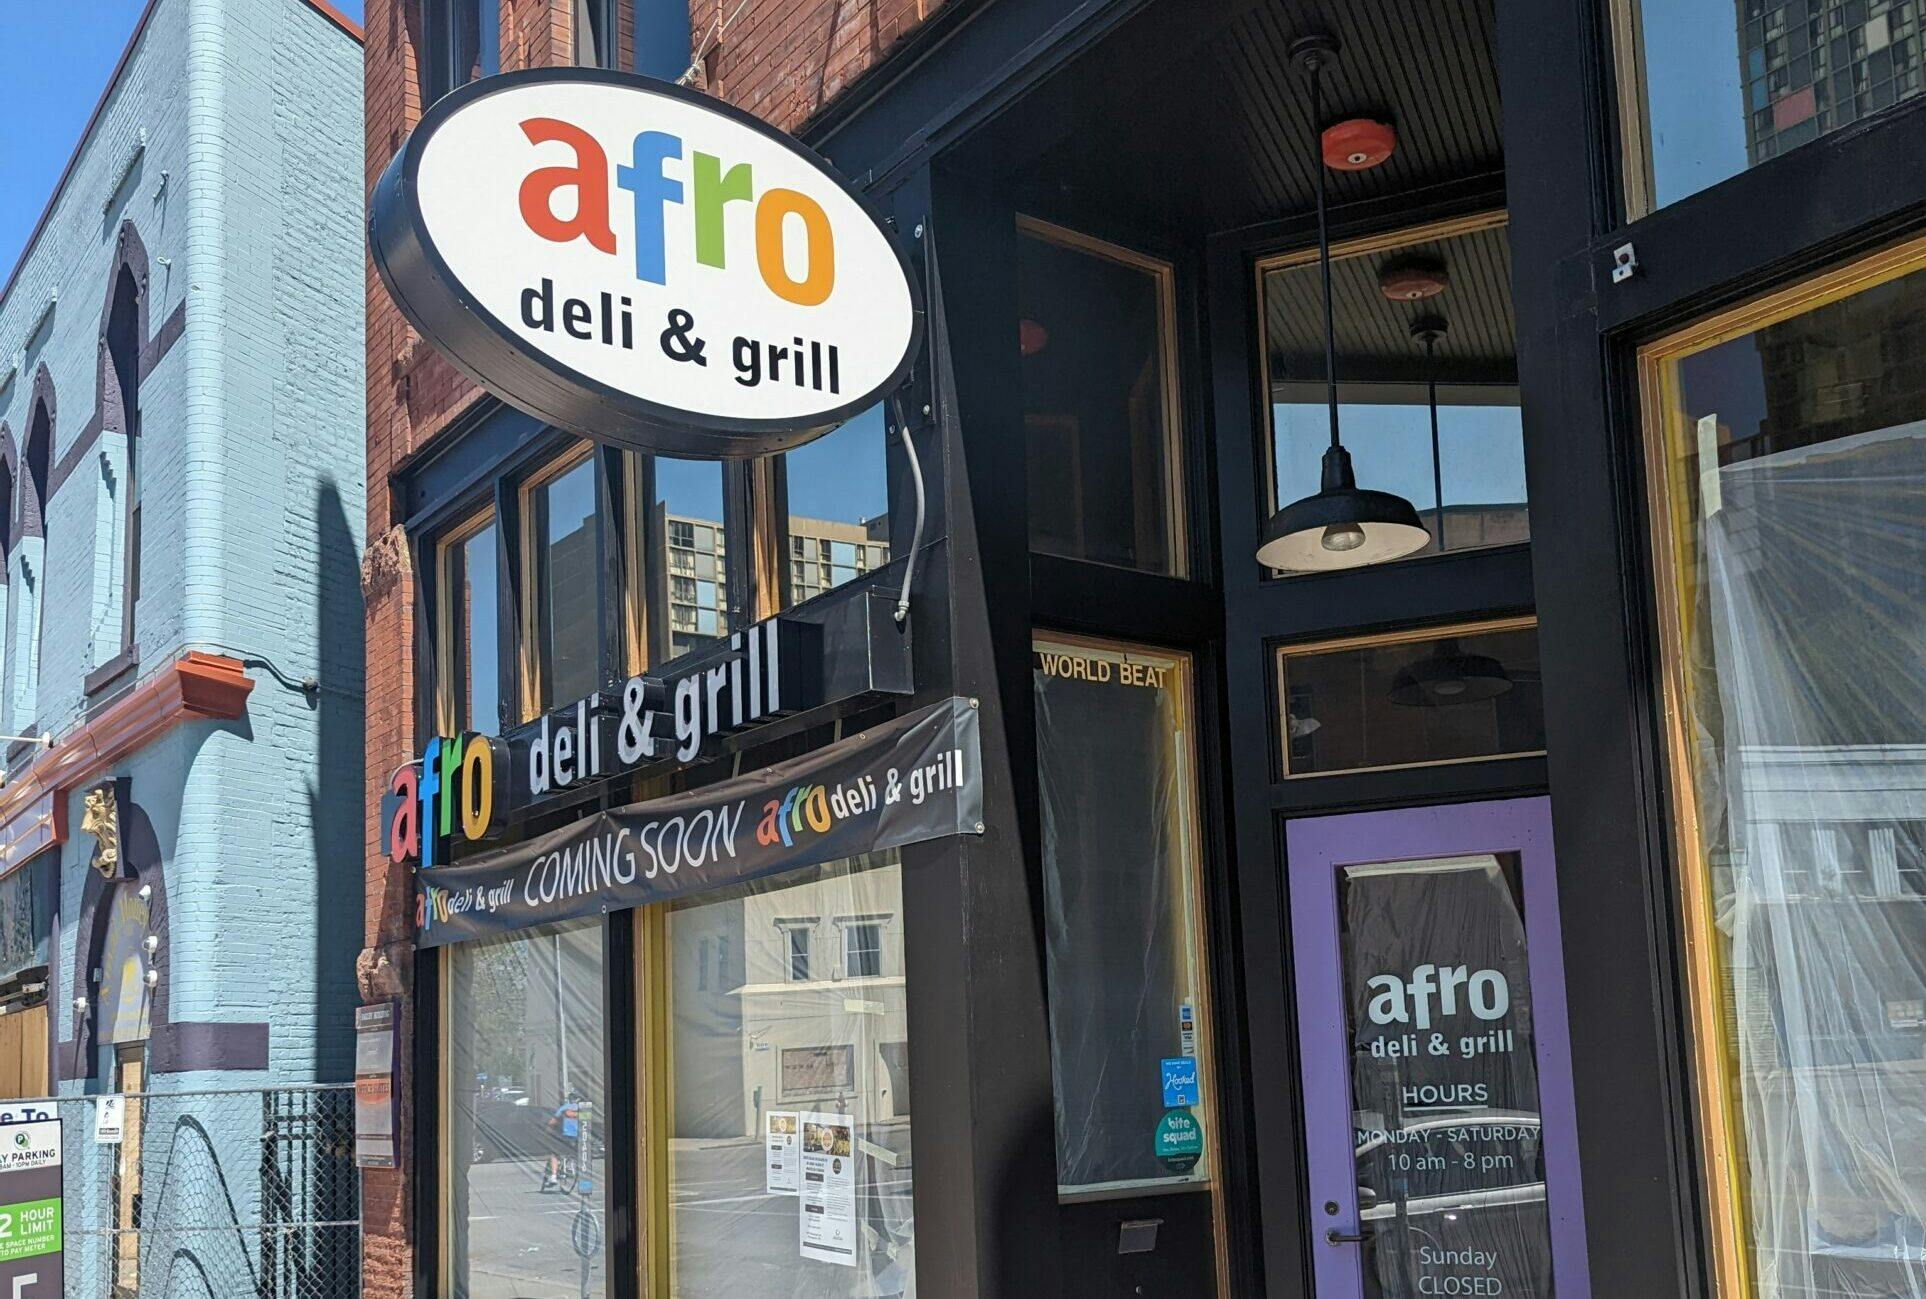 Taste Africa at Afro Deli & Grill